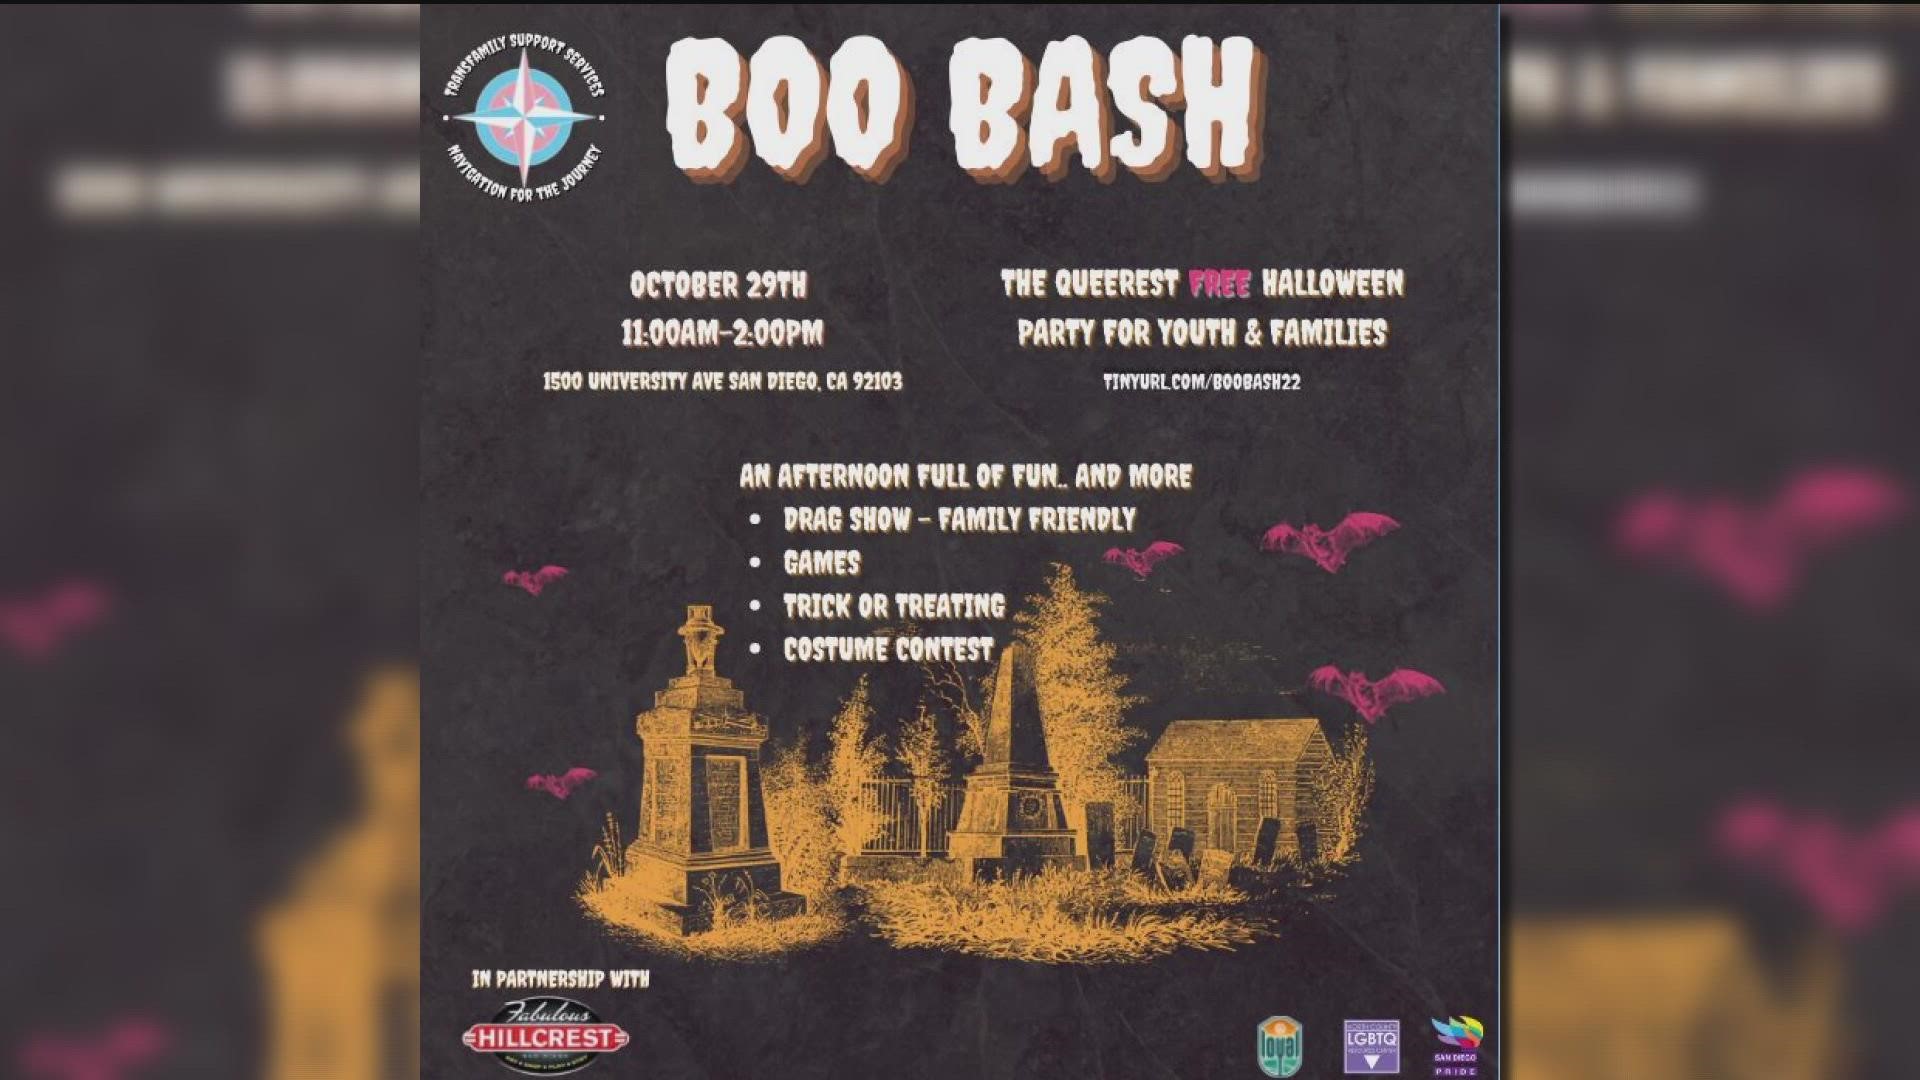 TransFamily Support Services forced to raise extra money to beef up security amid protests over its upcoming Boo Bash Halloween Event.